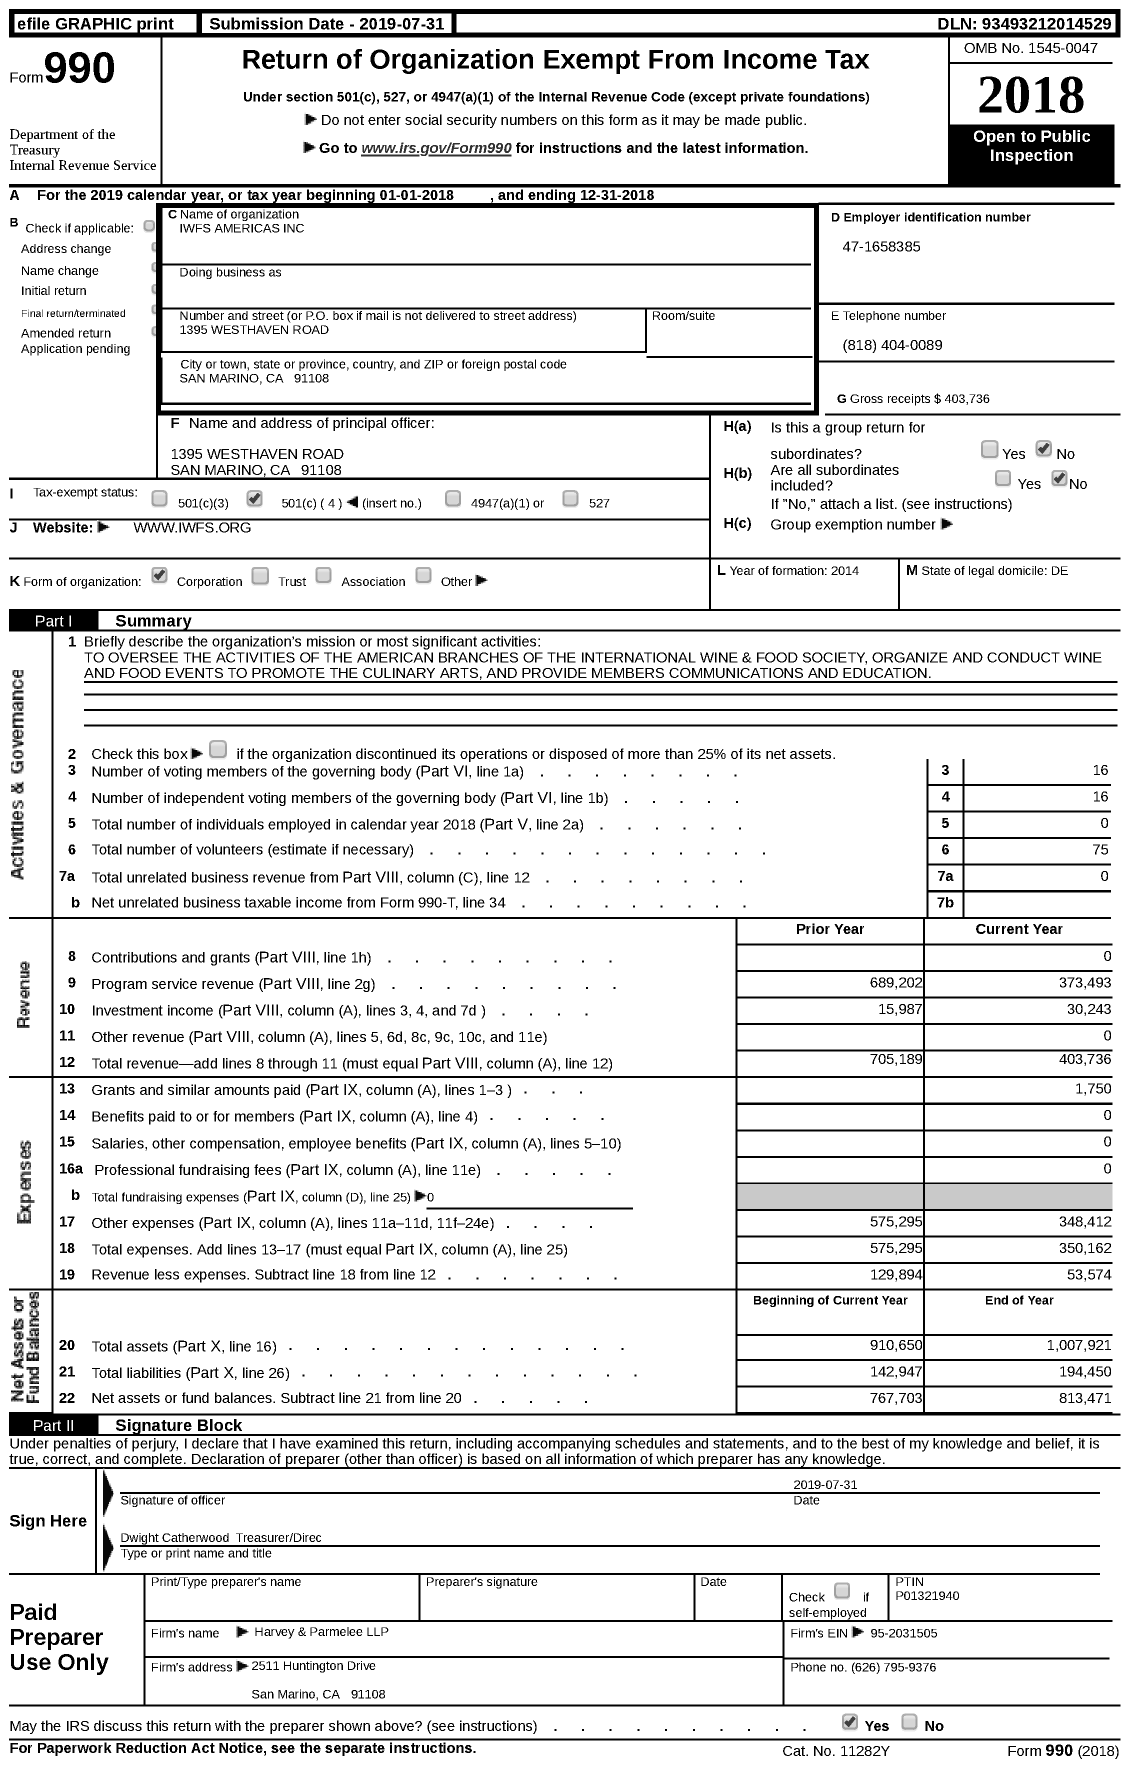 Image of first page of 2018 Form 990 for Iwfs Americas